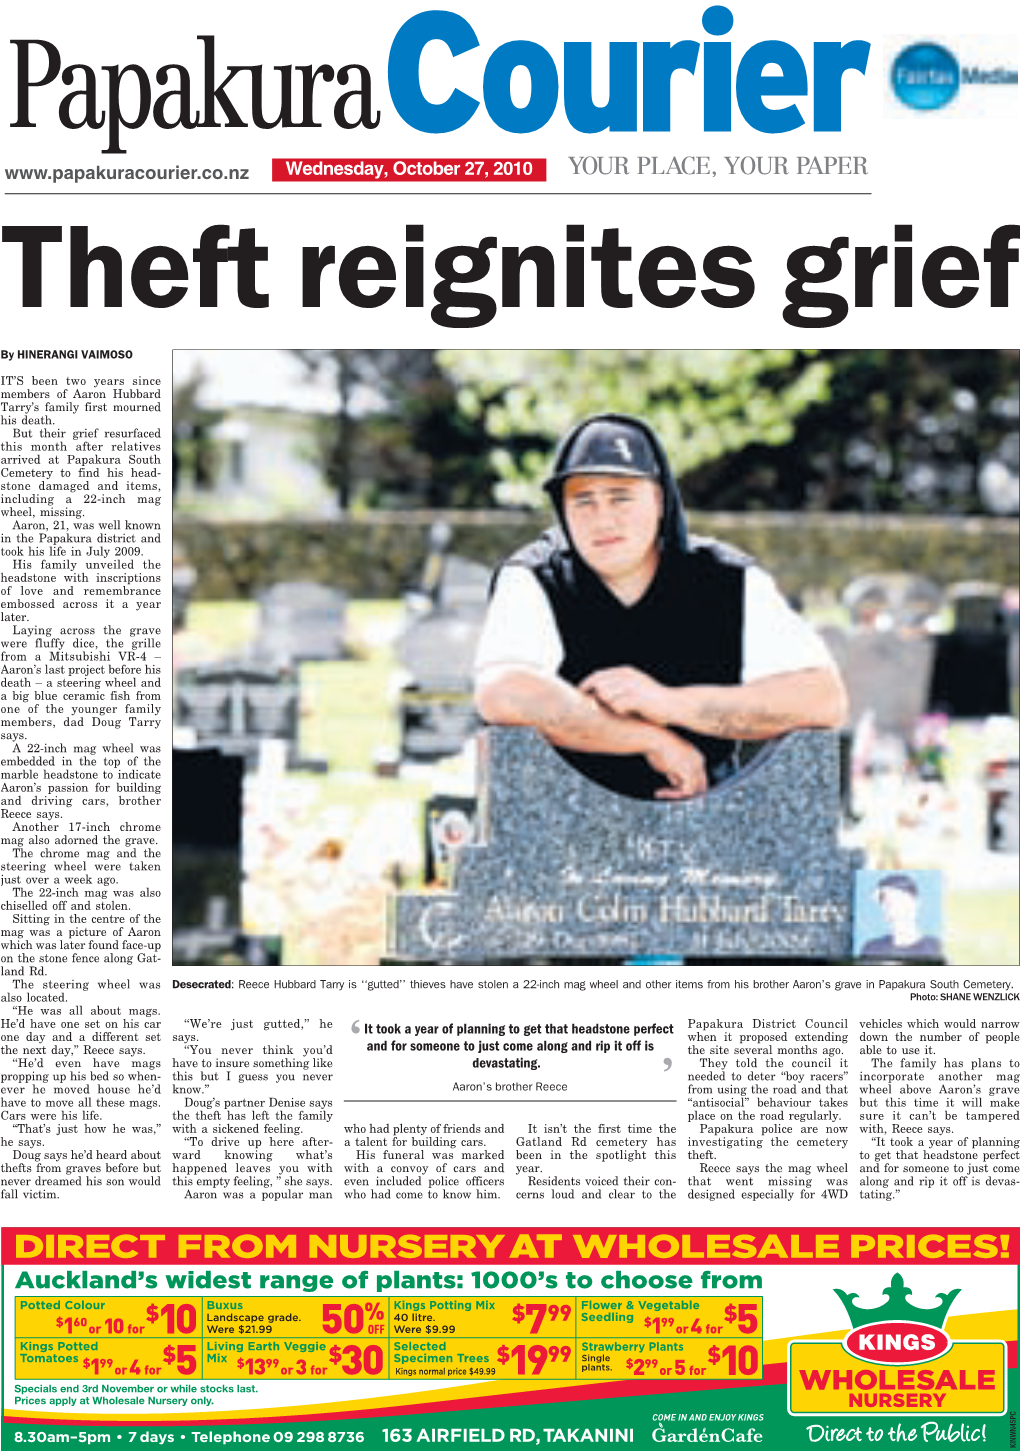 Papakuracourier.Co.Nz Wednesday, October 27, 2010 Theft Reignites Grief